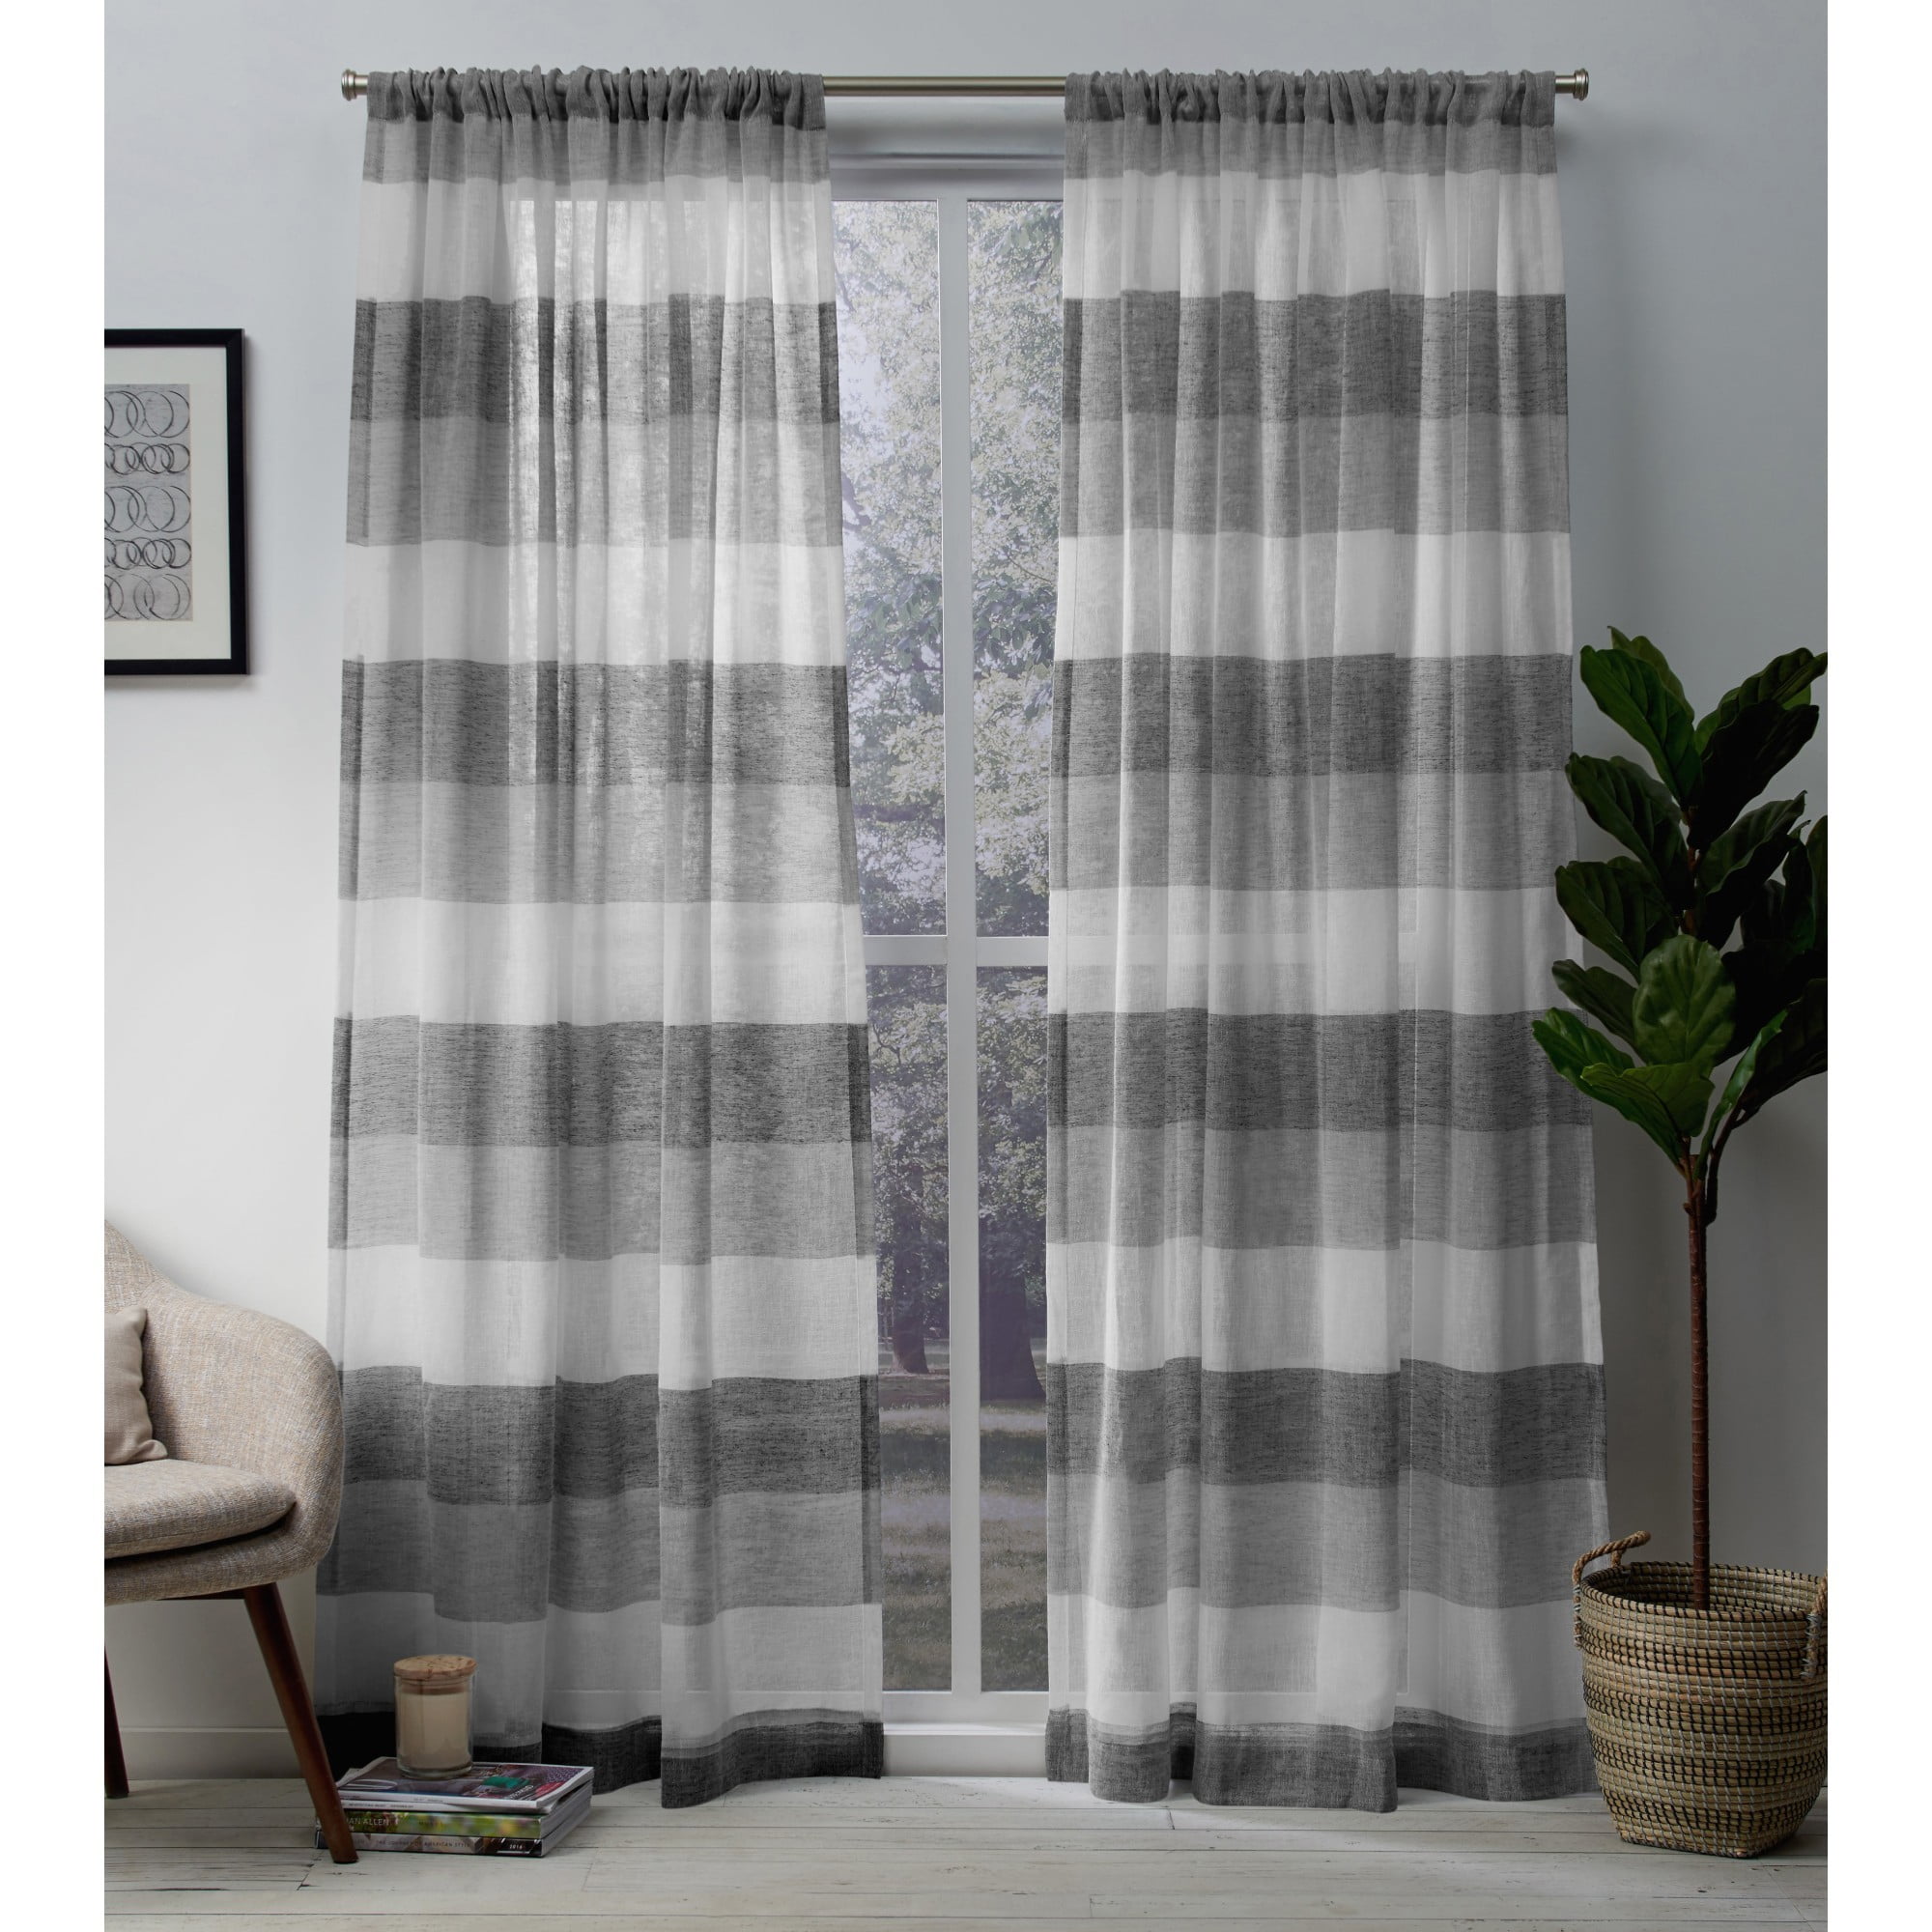 Exclusive Home Curtains 2 Pack Bern Stripe Sheer Rod ...